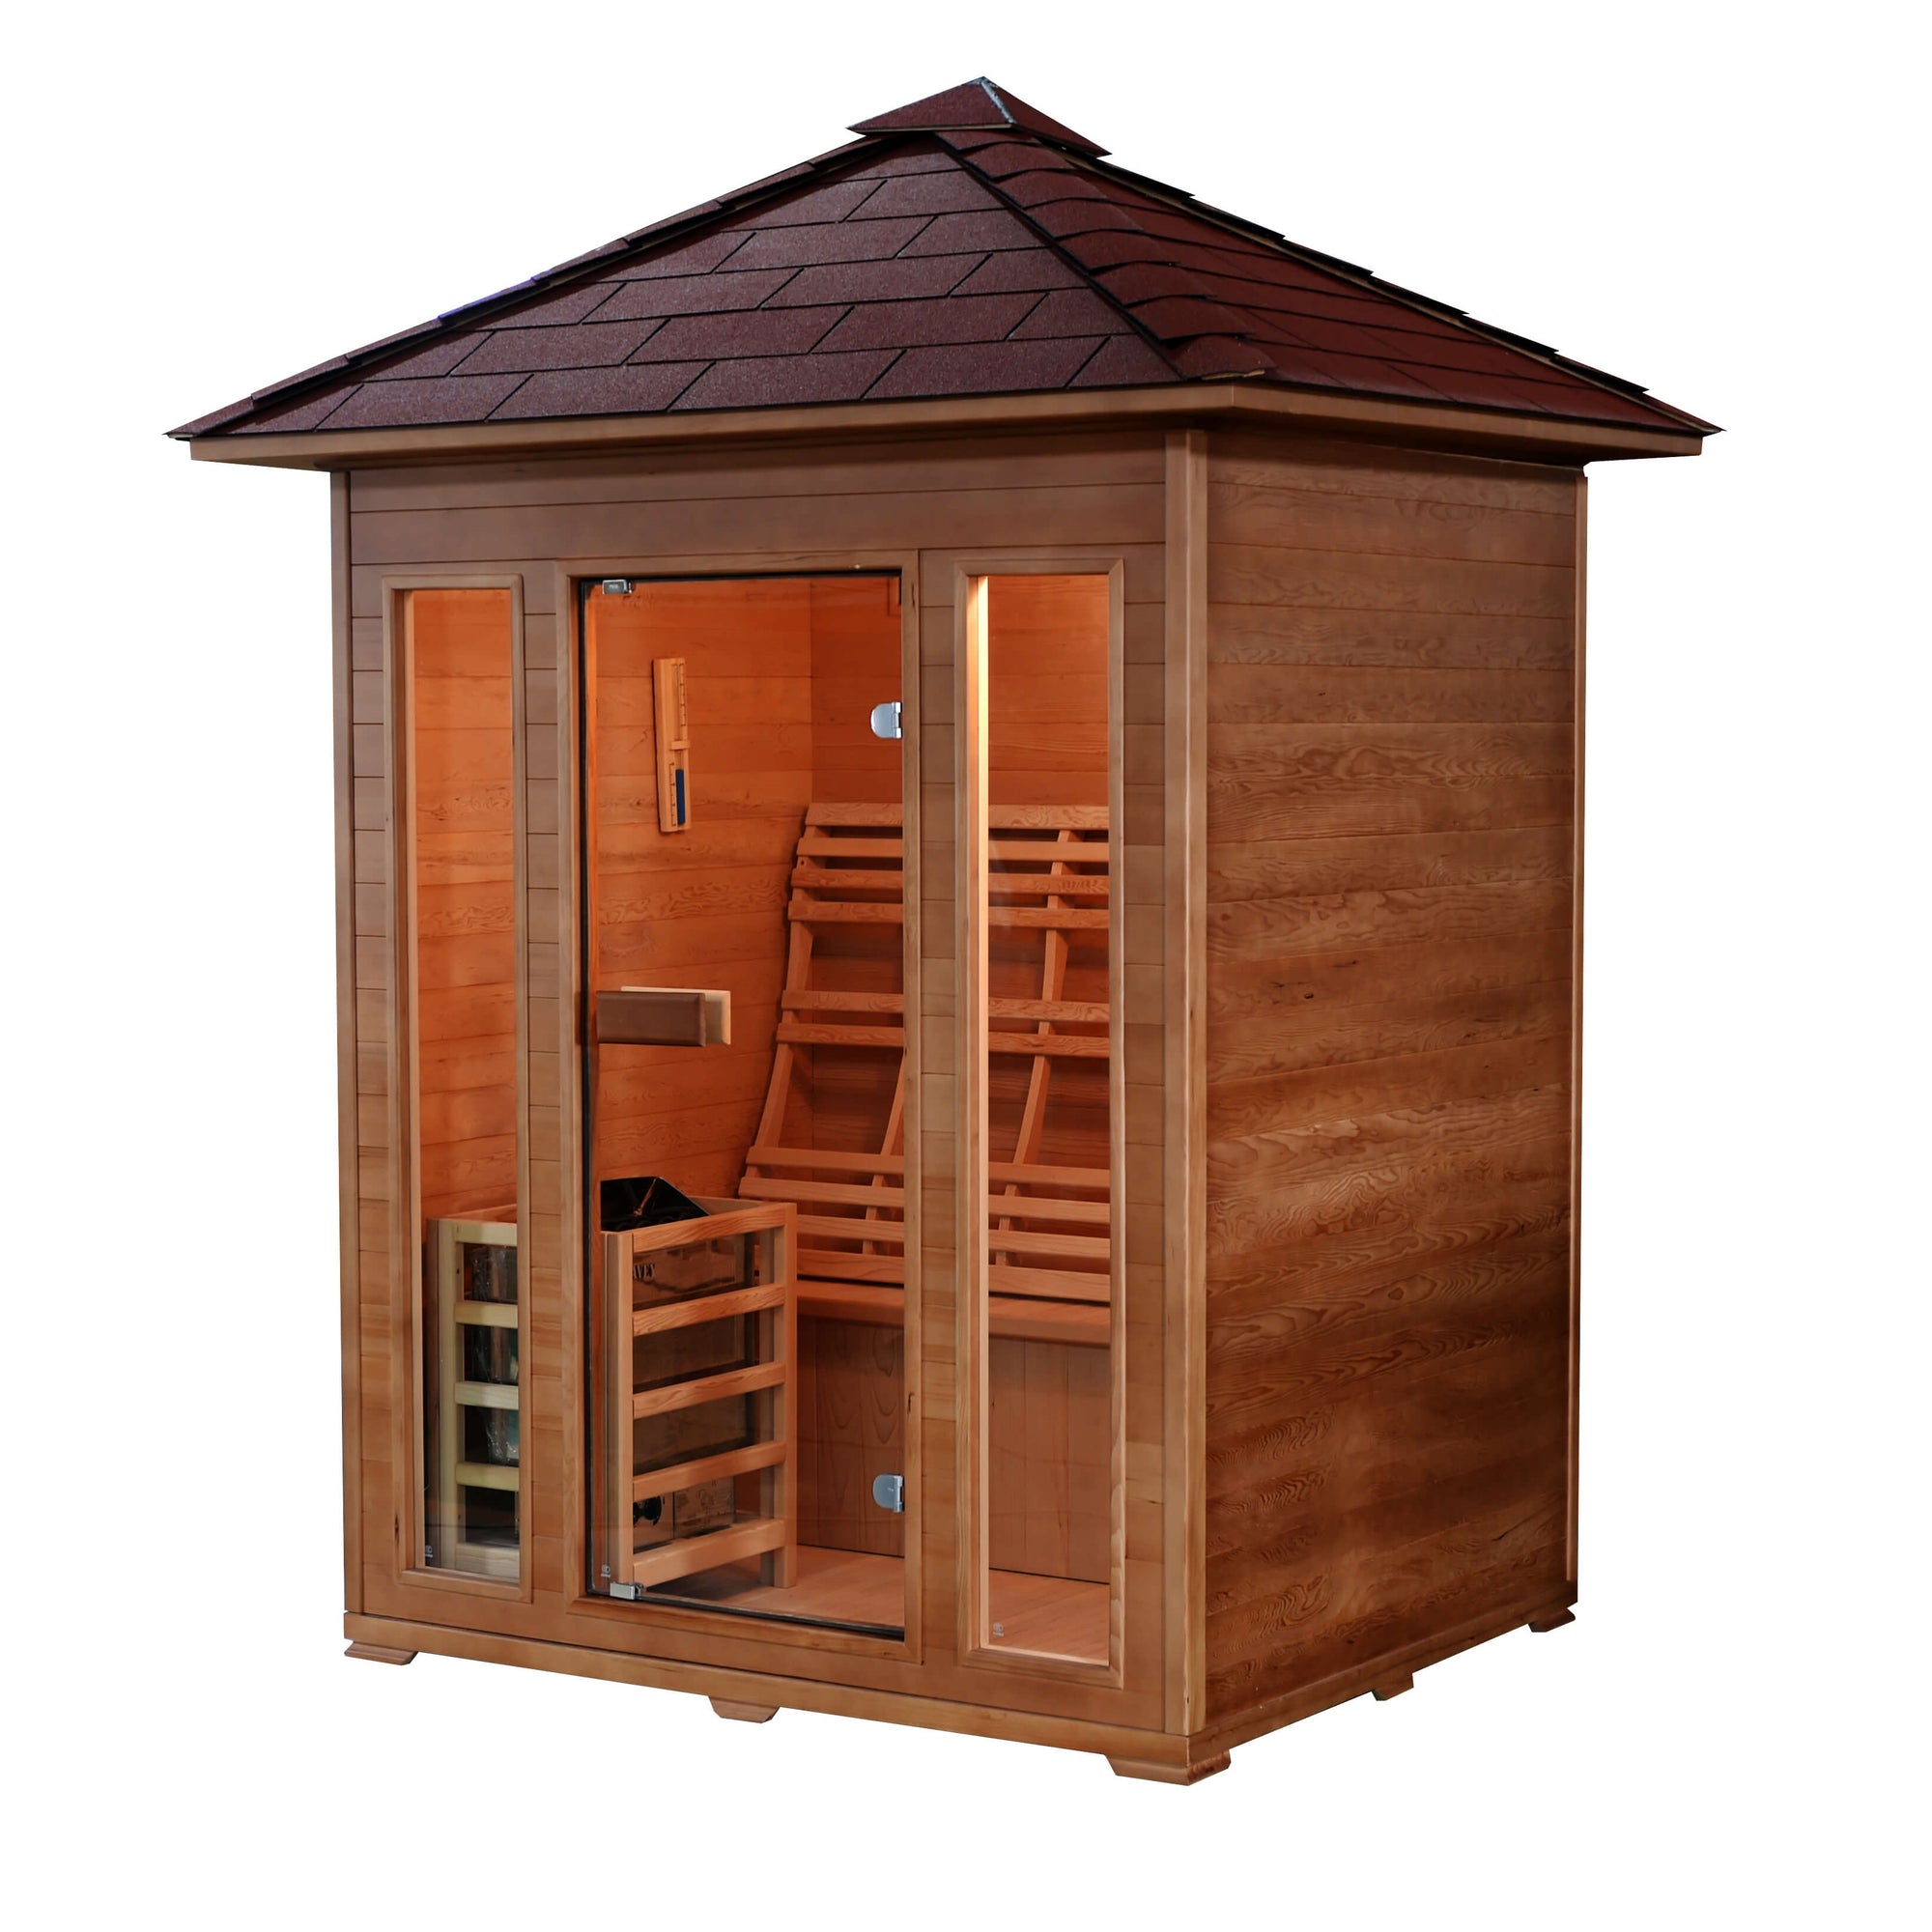 SunRay Waverly 3-Person Outdoor Traditional Sauna - Shingled roof with glass door, rear bench seat, 4.5 kW Heater with Rocks - HL300D2 Waverly - Isometric view